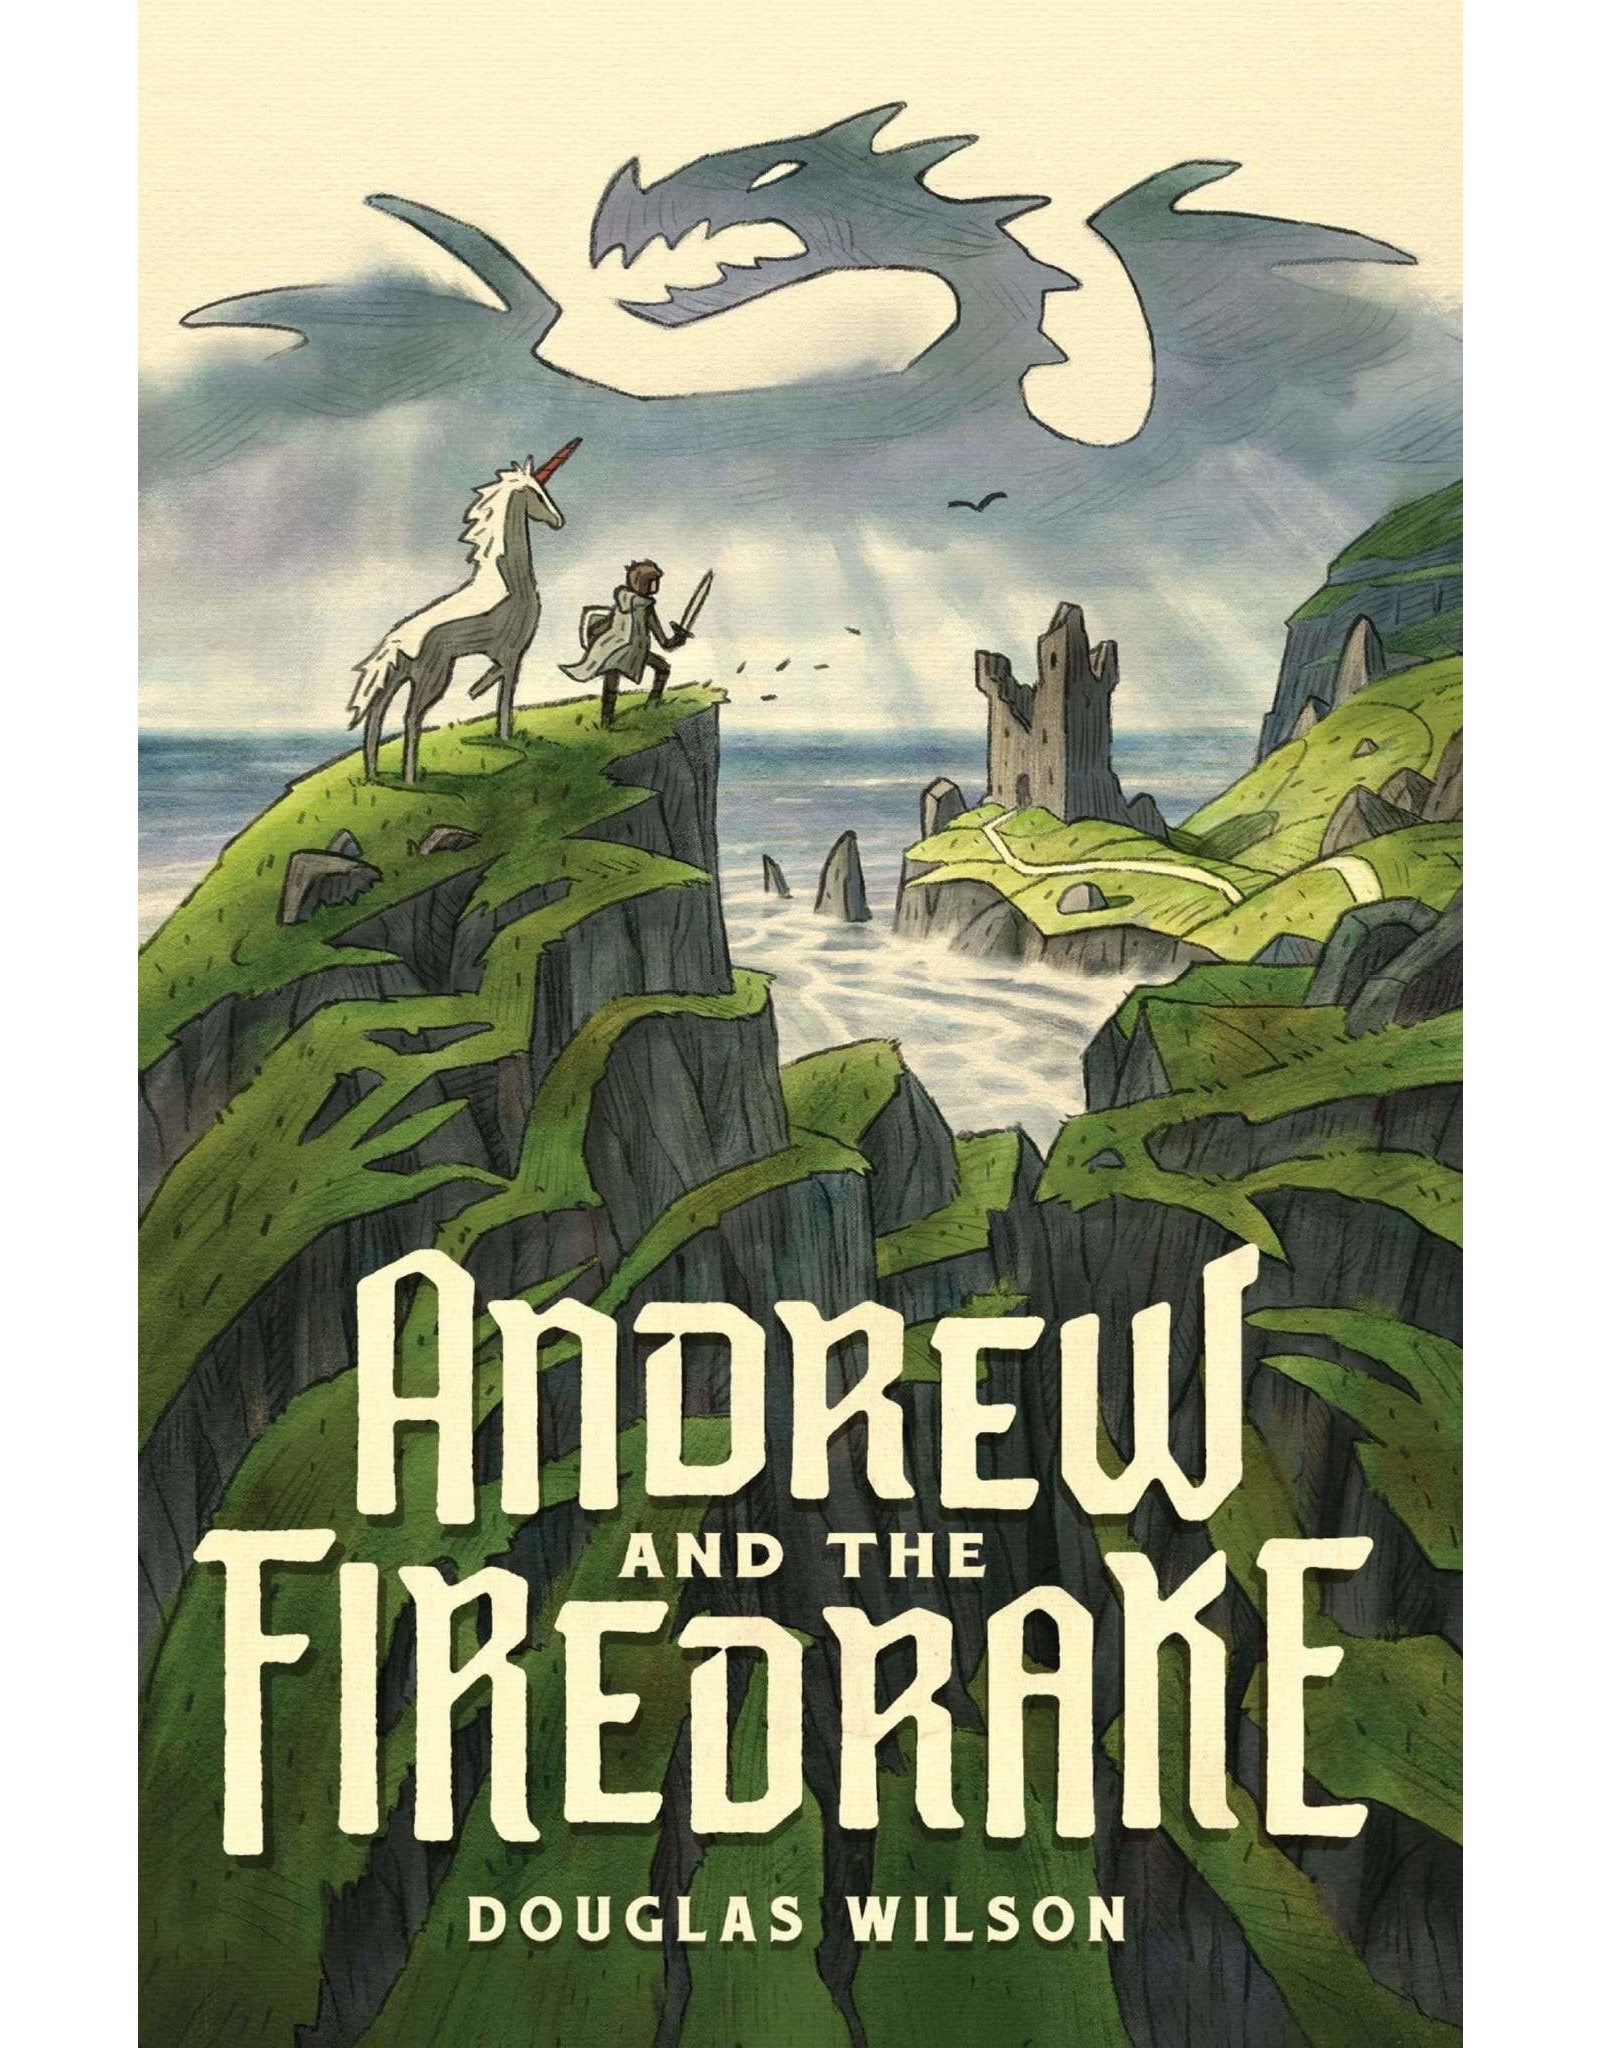 Andrew and the Firedrake